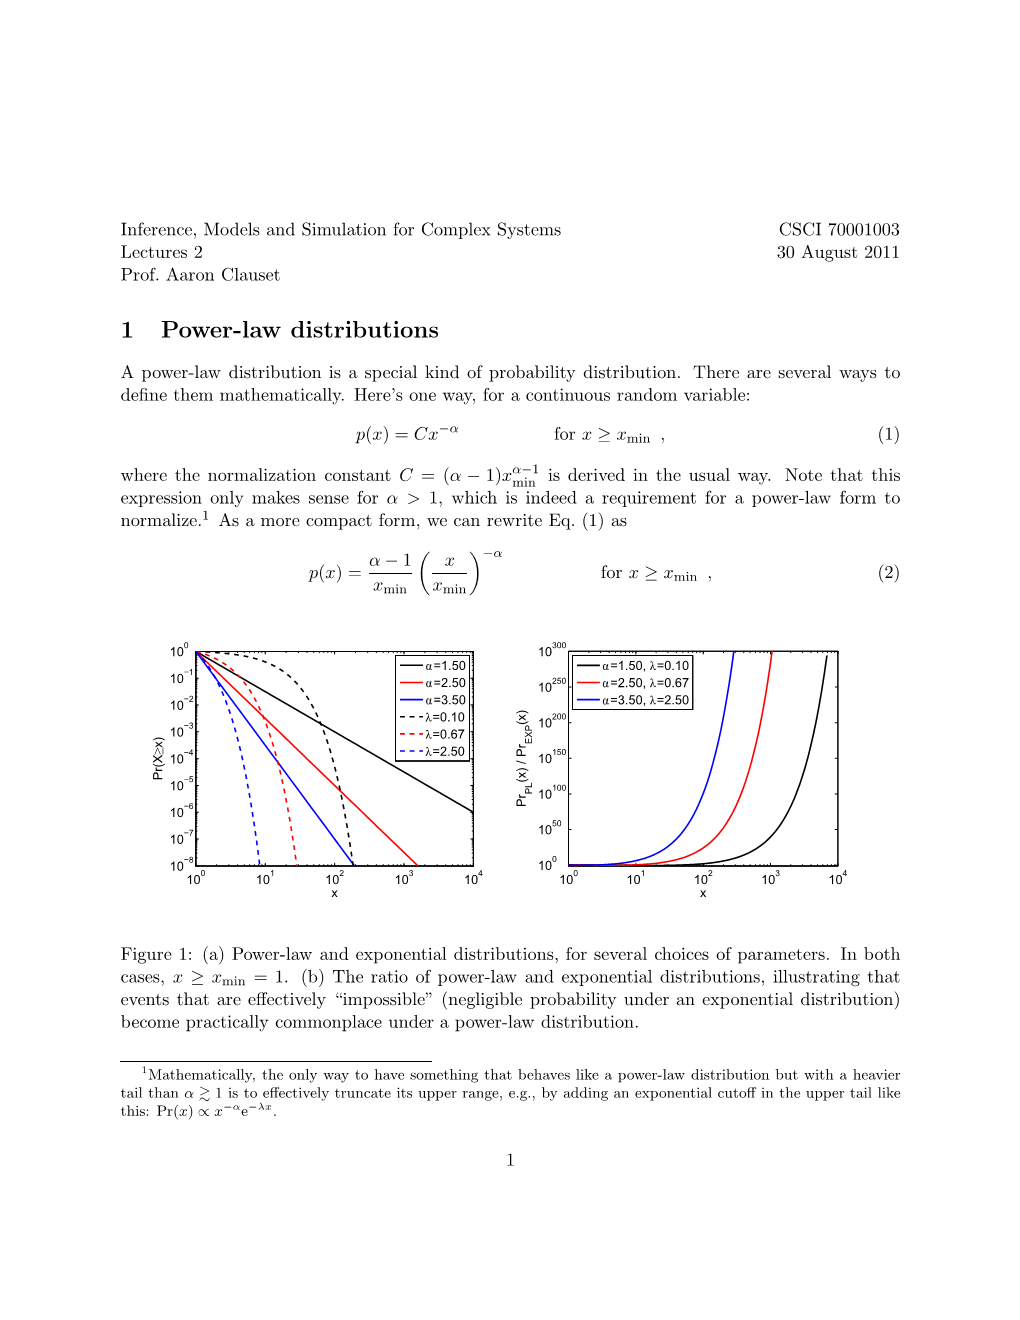 1 Power-Law Distributions